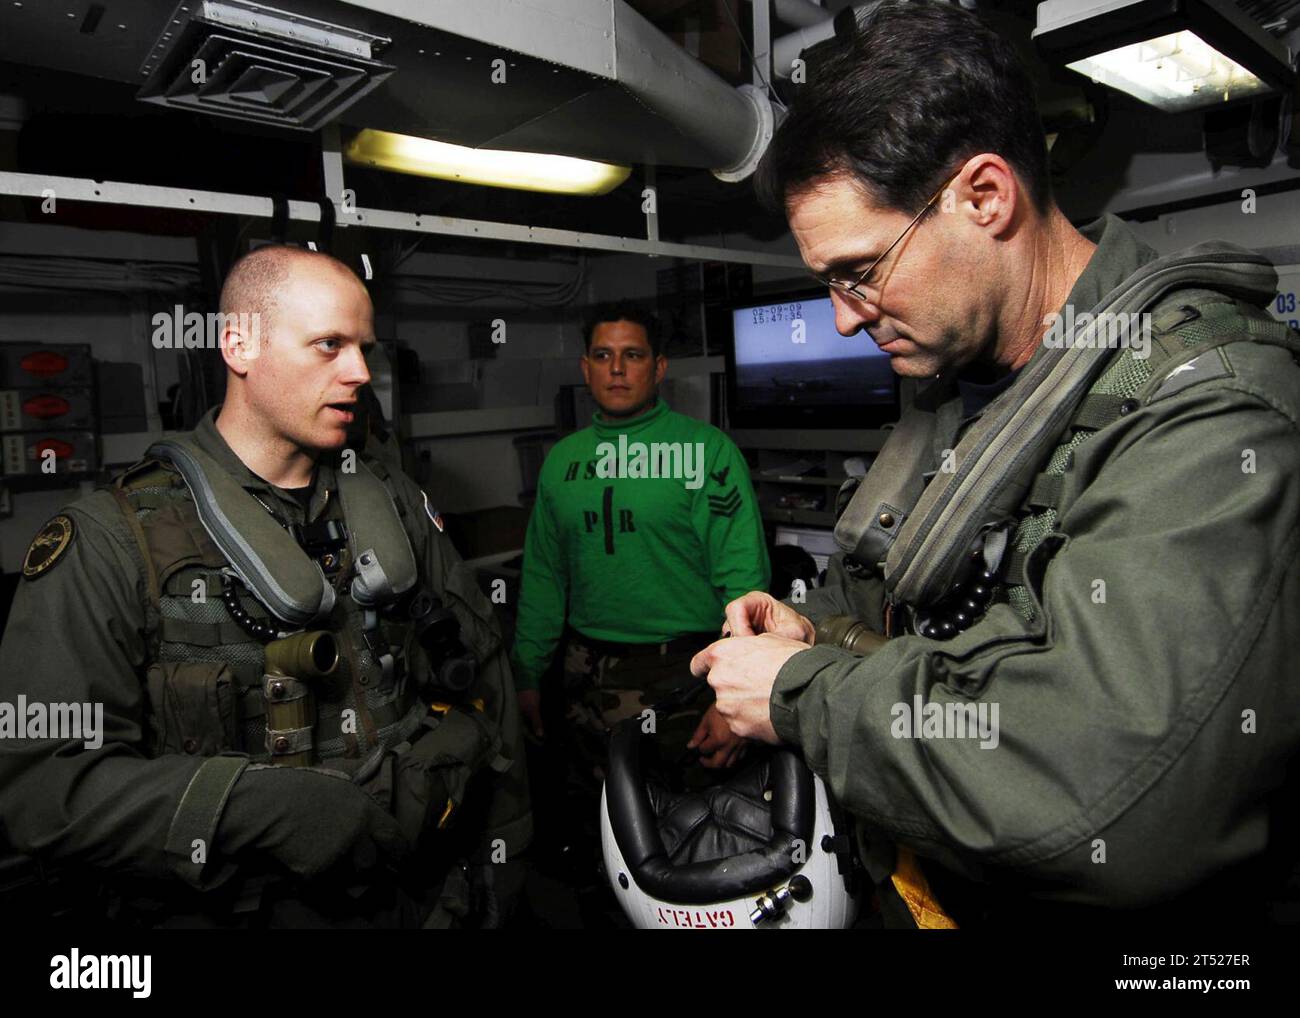 0902096538W-300 PACIFIC OCEAN (Feb. 9, 2009) Naval Air Crewman 1st Class Kelvin Glienke, left, from Webb, Iowa, briefs Commander, U.S. 7th Fleet, Vice Adm. John Bird aboard the Nimitz-class aircraft carrier USS John C. Stennis (CVN 74) before a flight in an MH-60R Sea Hawk helicopter from the 'Raptors' of Helicopter Maritime Strike Squadron (HSM) 71. Bird was aboard to observe an under sea warfare exercise involving the Japan Maritime Self-Defense Force and the John C. Stennis Carrier Strike Group. John C. Stennis and Carrier Air Wing (CVW) 9 are on a scheduled six-month deployment to the west Stock Photo